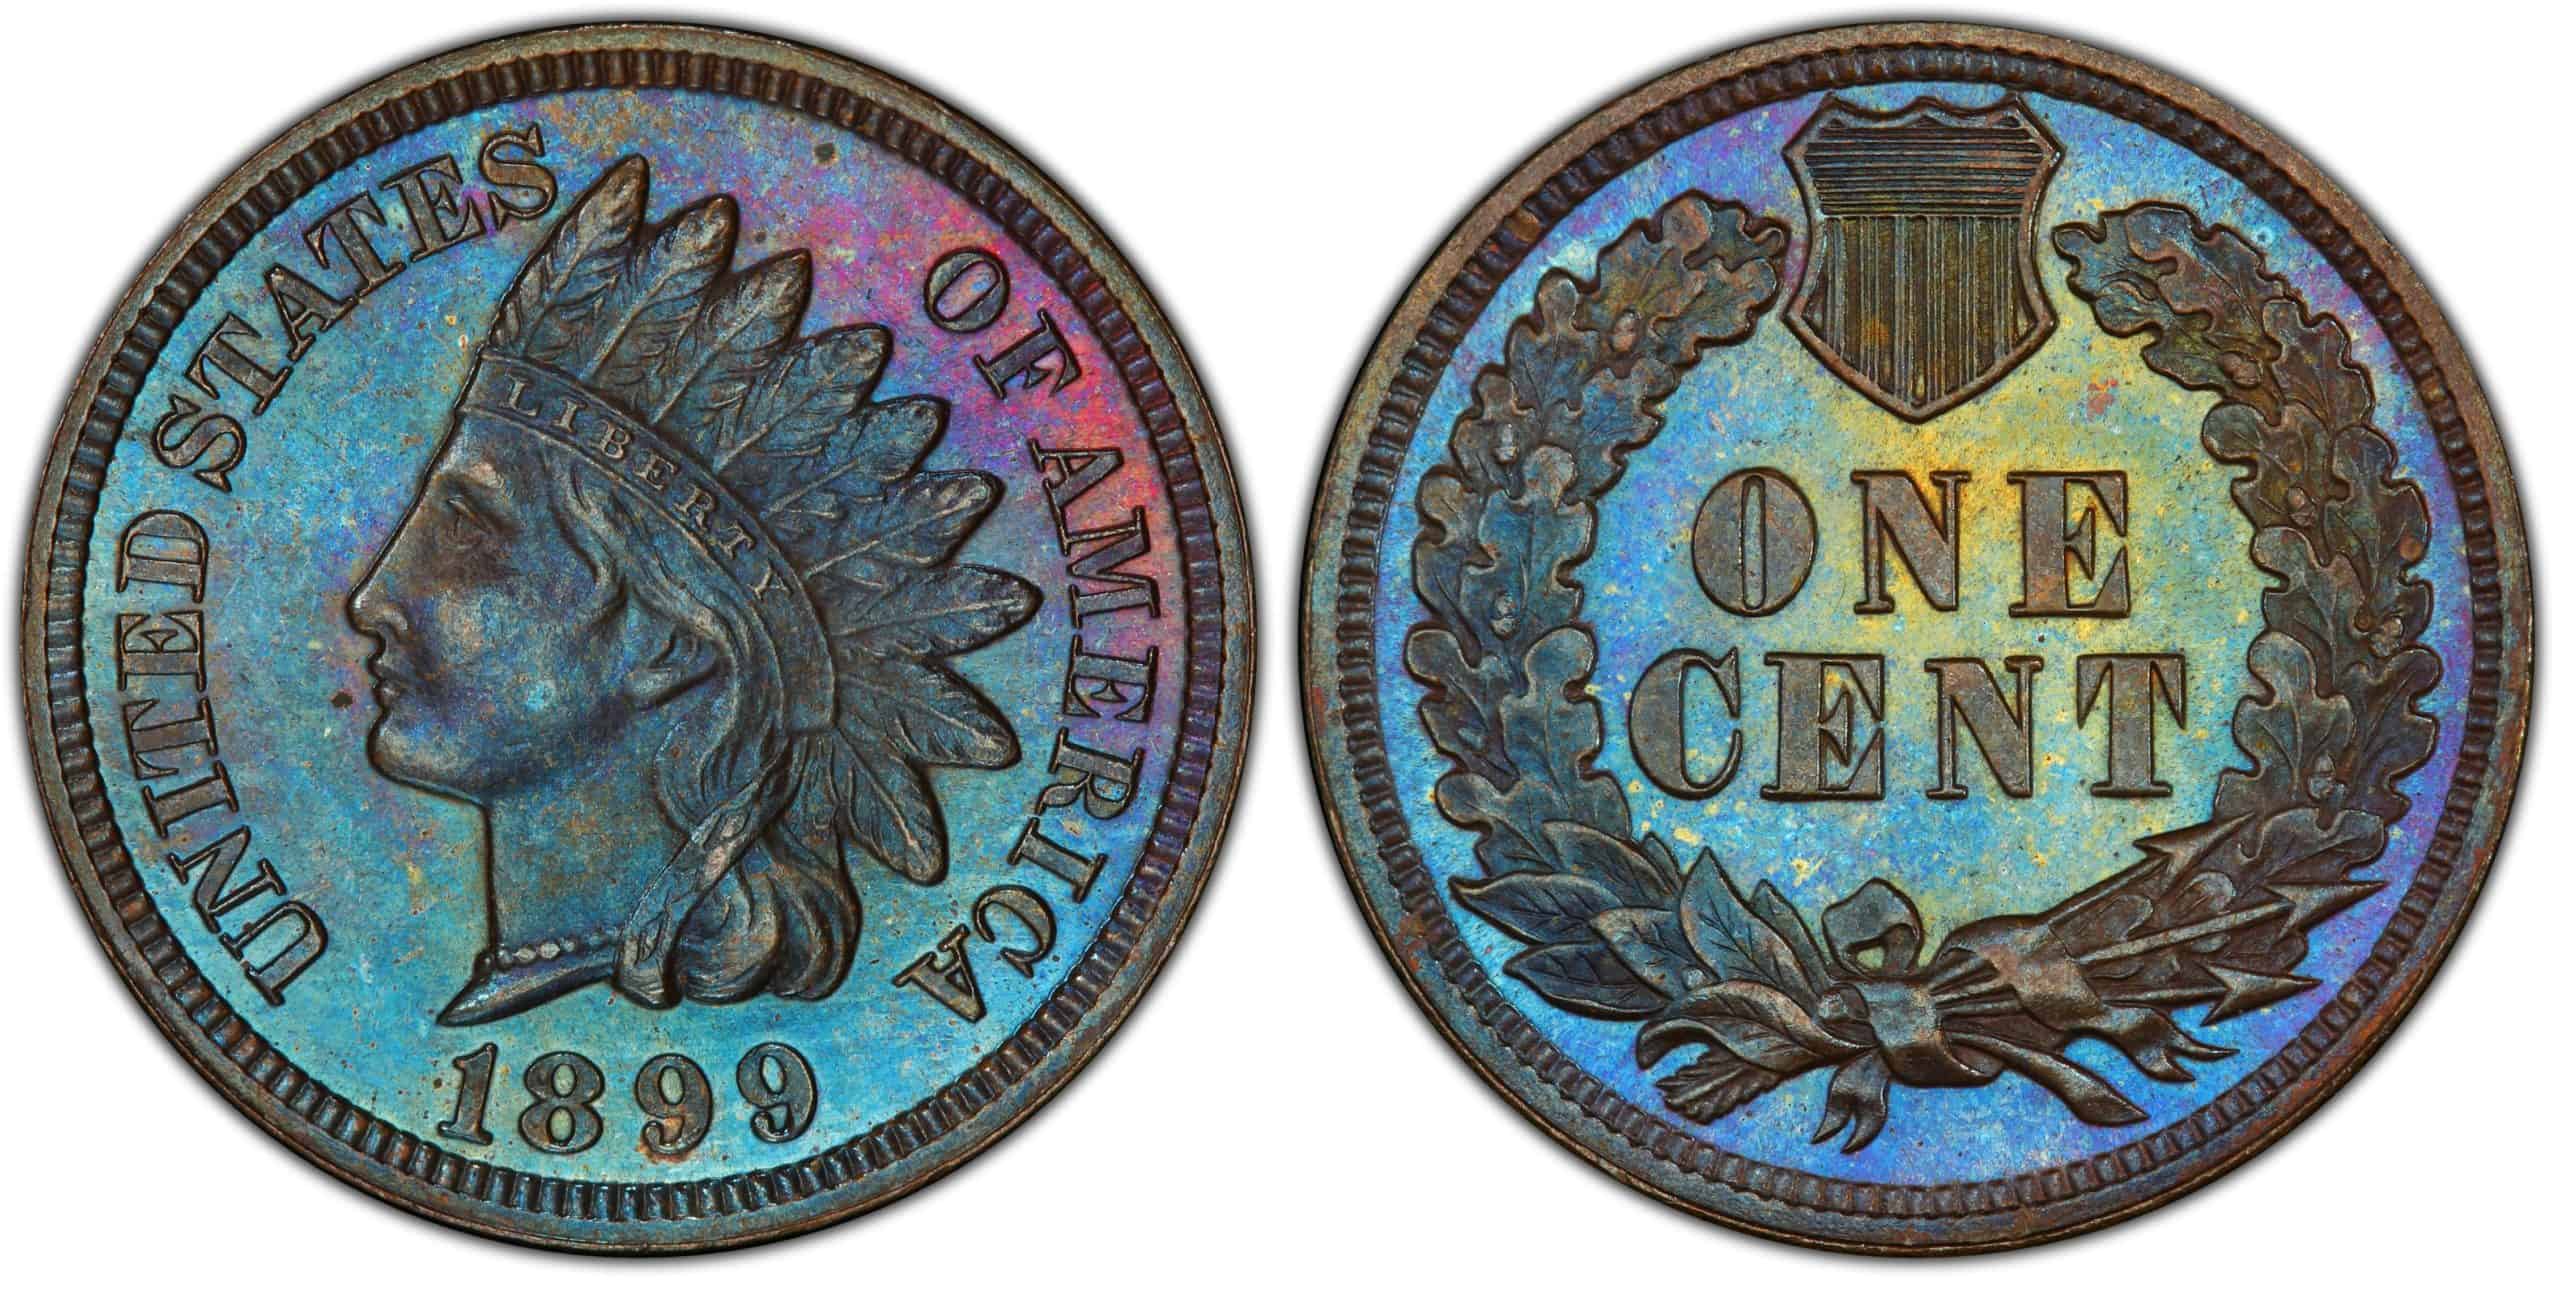 1899 proof Indian head penny